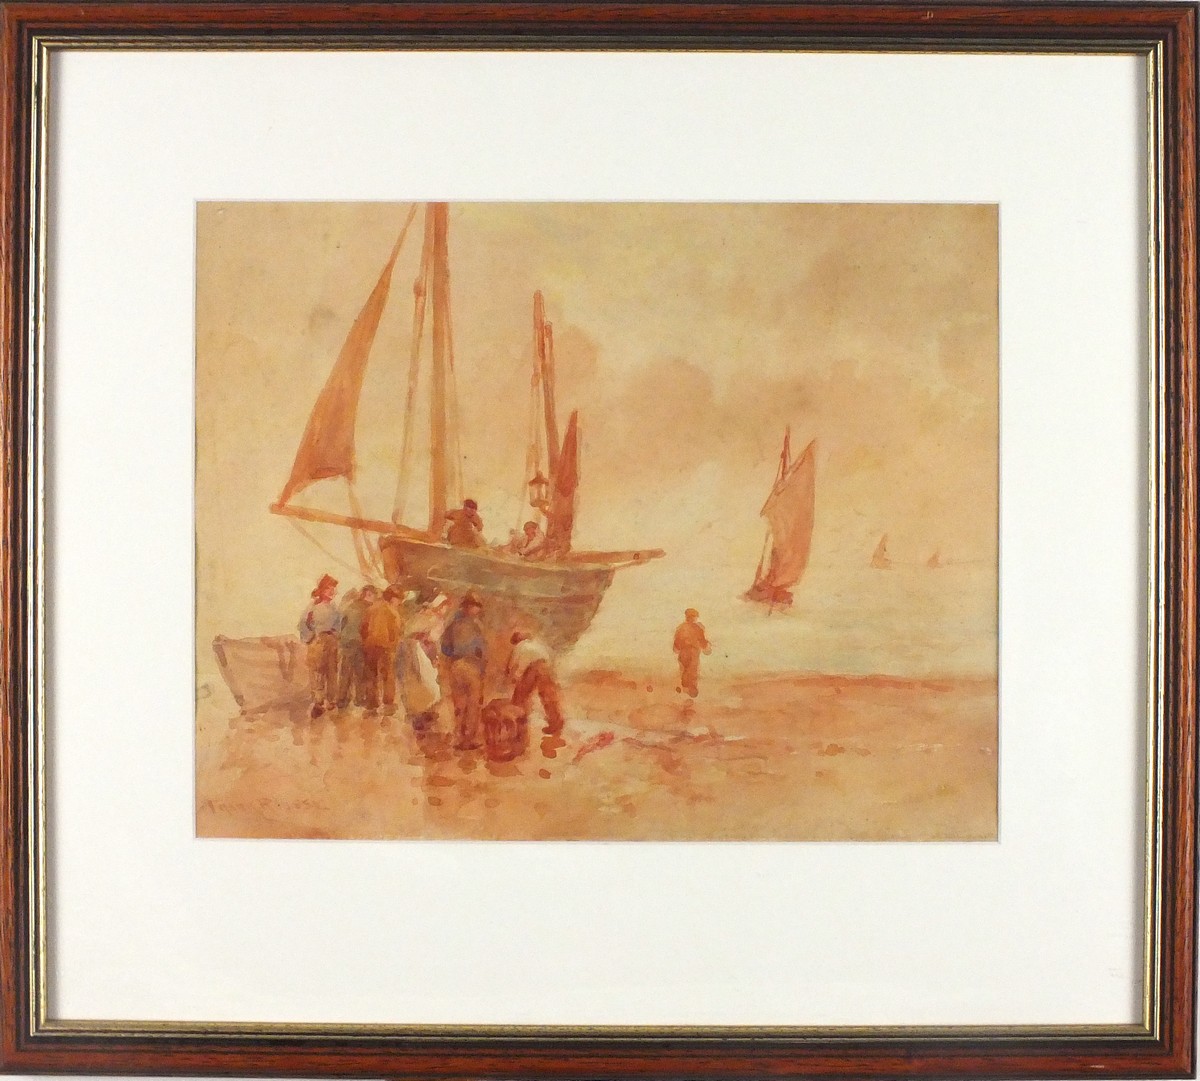 Frank ROUSSE (British act.1894-1917) Unloading the Catch, Watercolour, Signed lower left, 9.25" x - Image 2 of 2